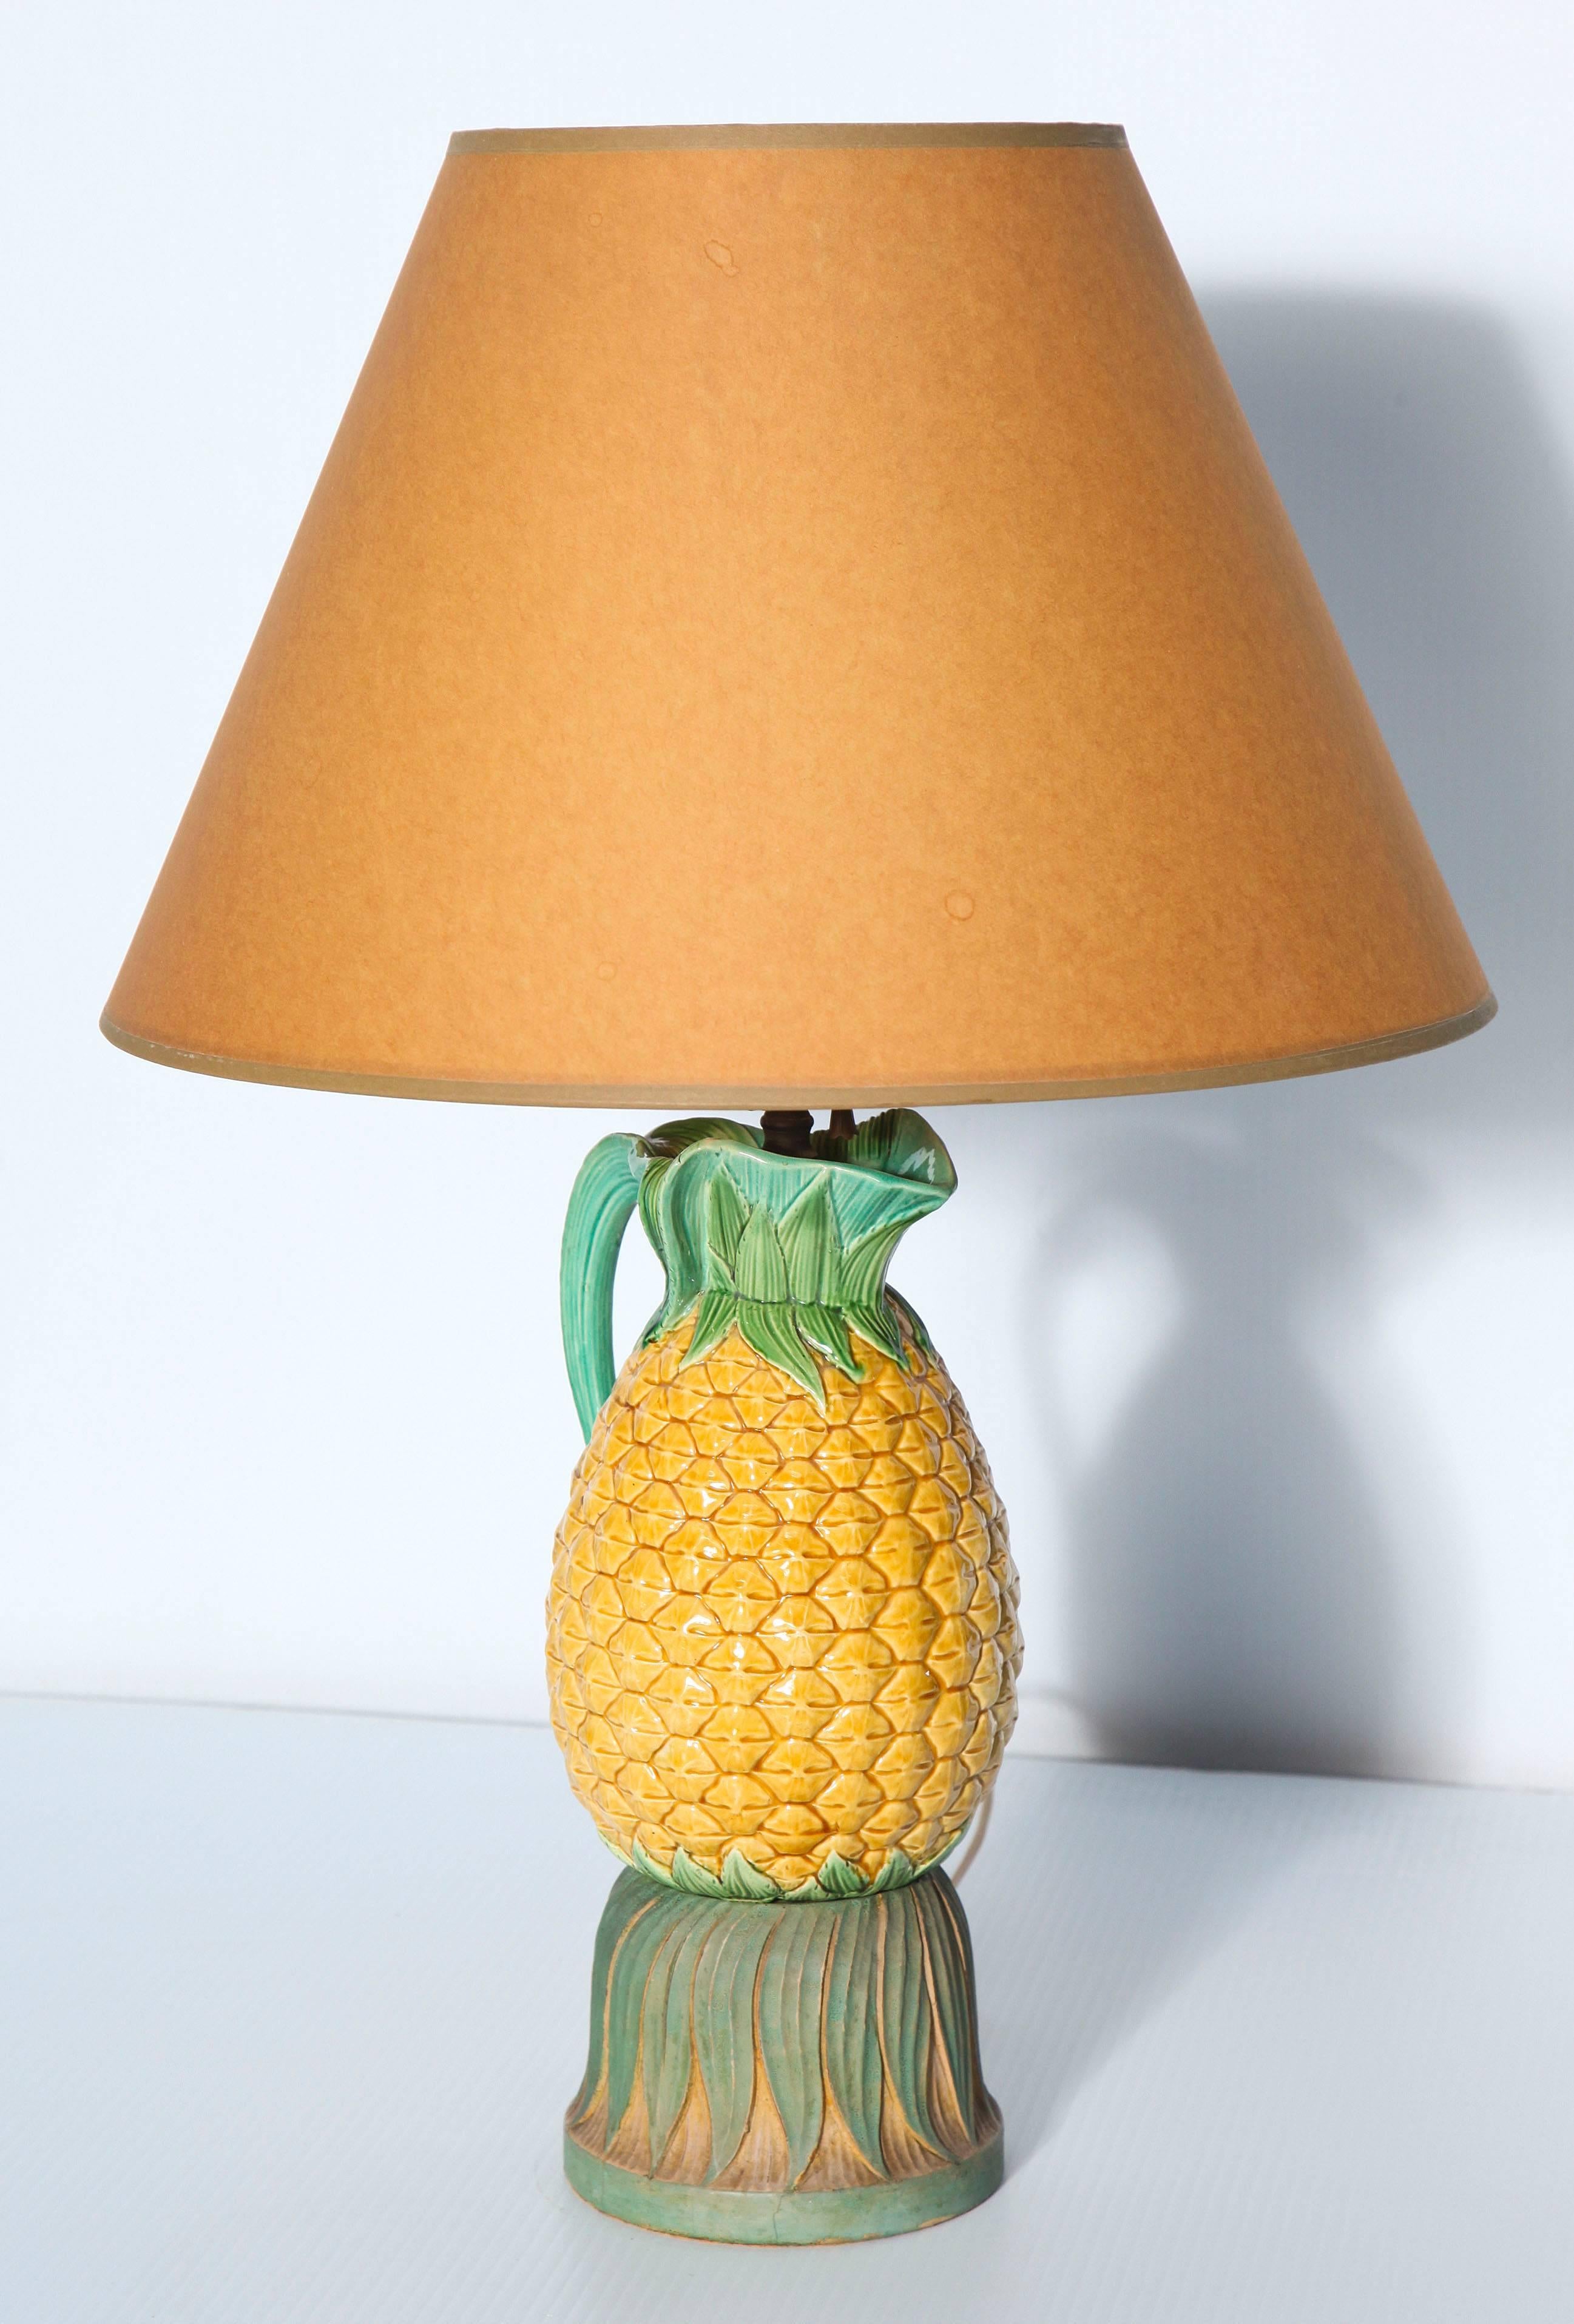 Italian Late 19th Century Majolica Pineapple Pitcher Mounted as a Lamp